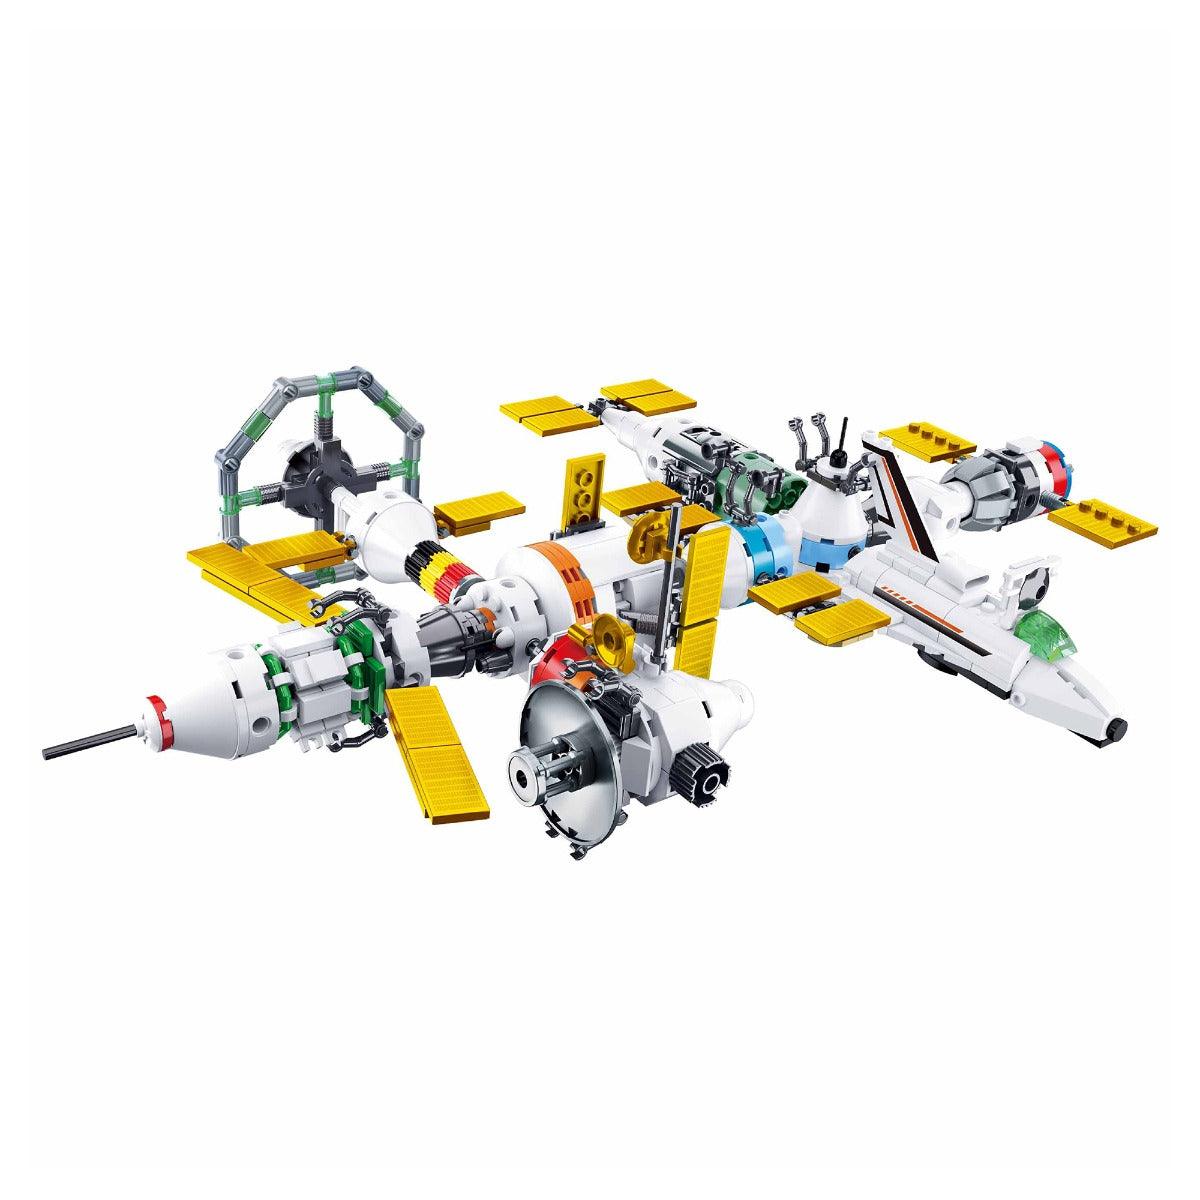 Sluban International Space Station 8 In 1 Building Blocks For Ages 6+